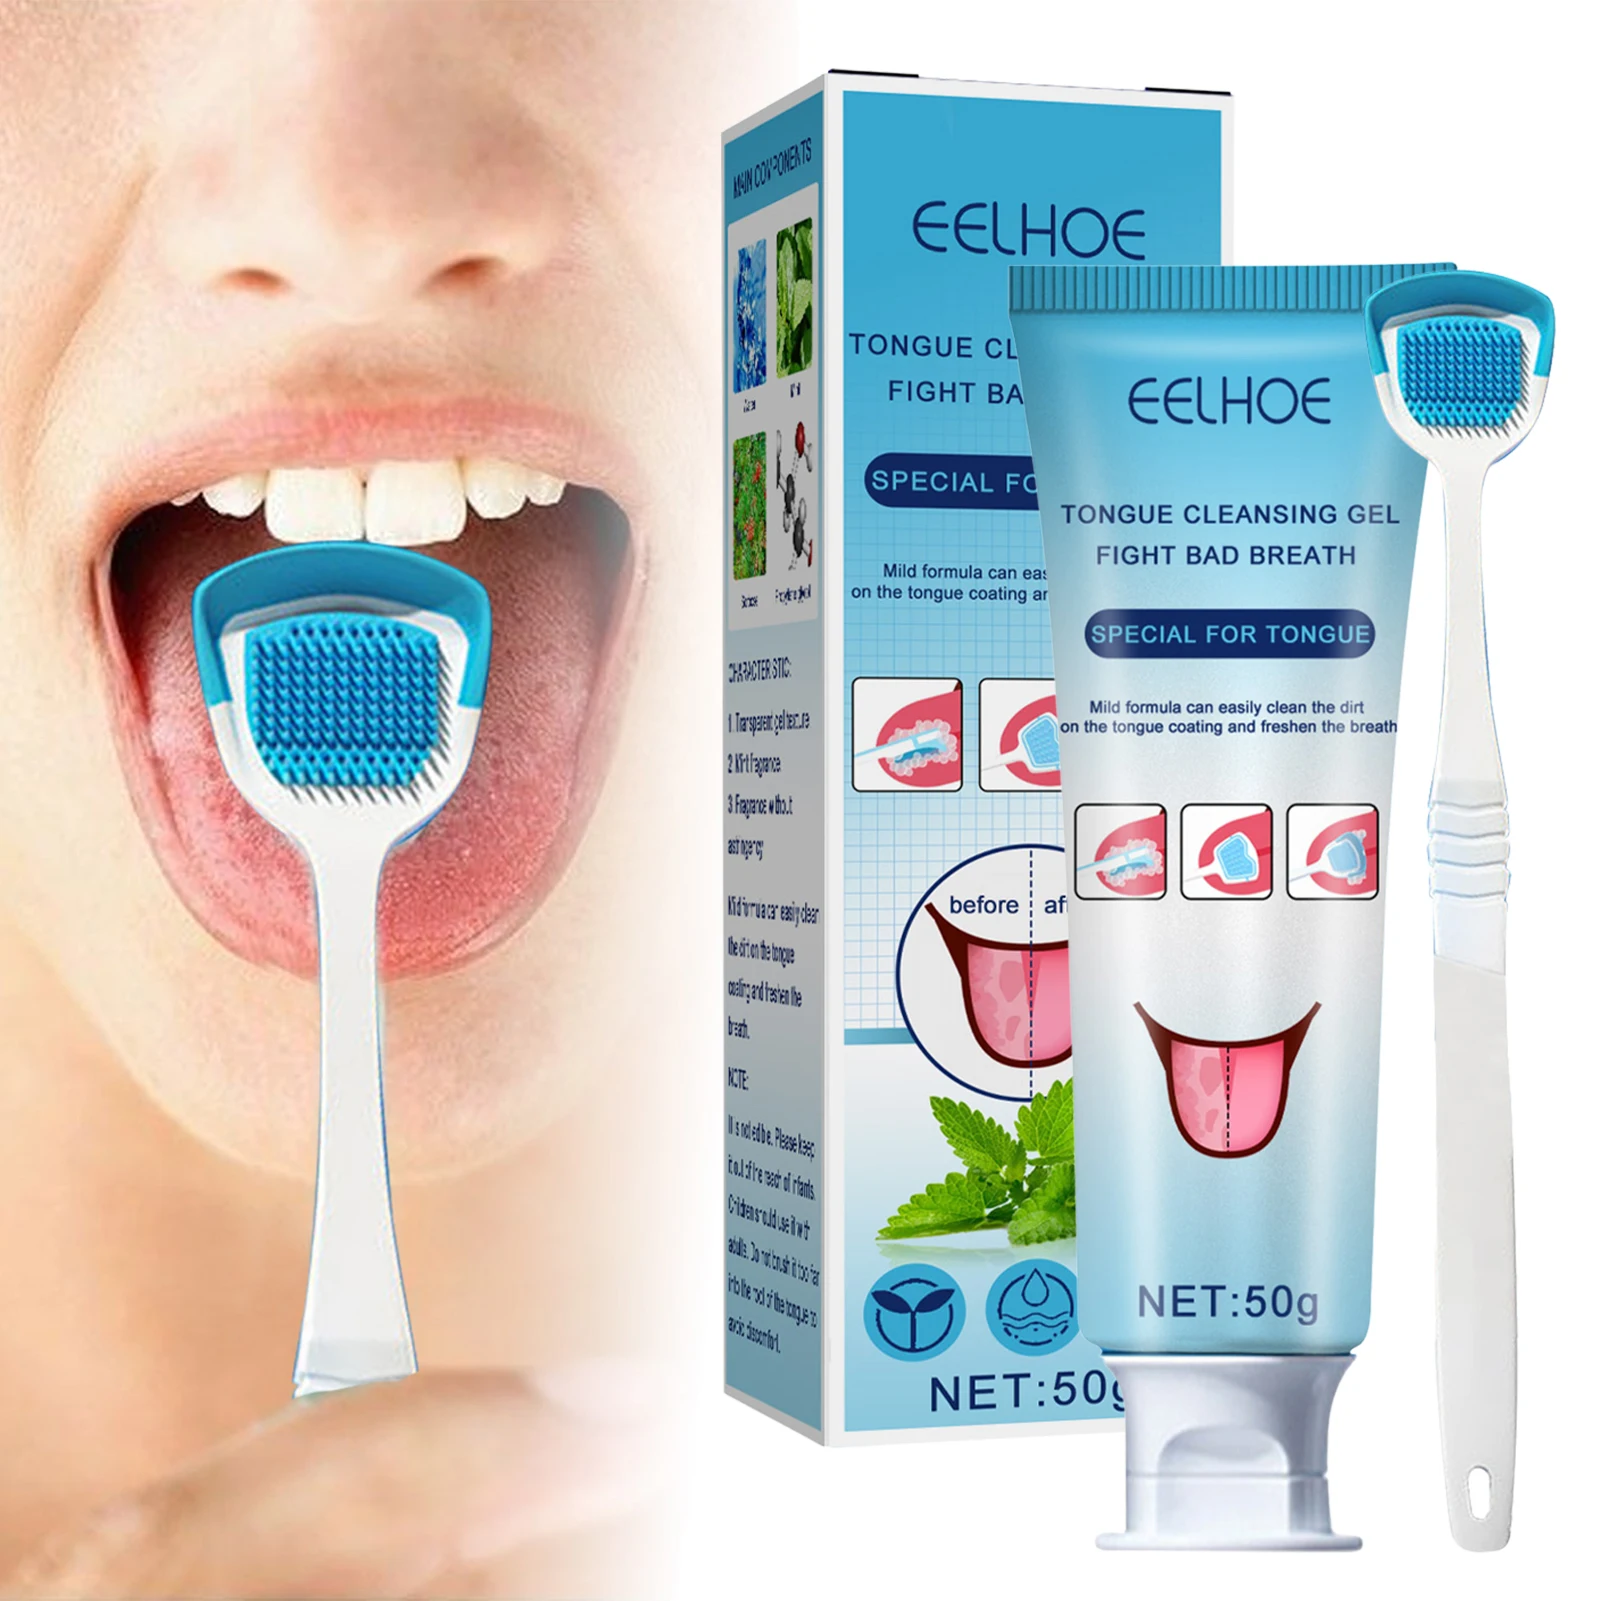 Tongue Cleaning Kit Tongue Cleaning Gel With Brush Tongue Cleaner Brush  Silicone Scraper Toothbrush Fresh Breath - Tongue Cleaners - AliExpress